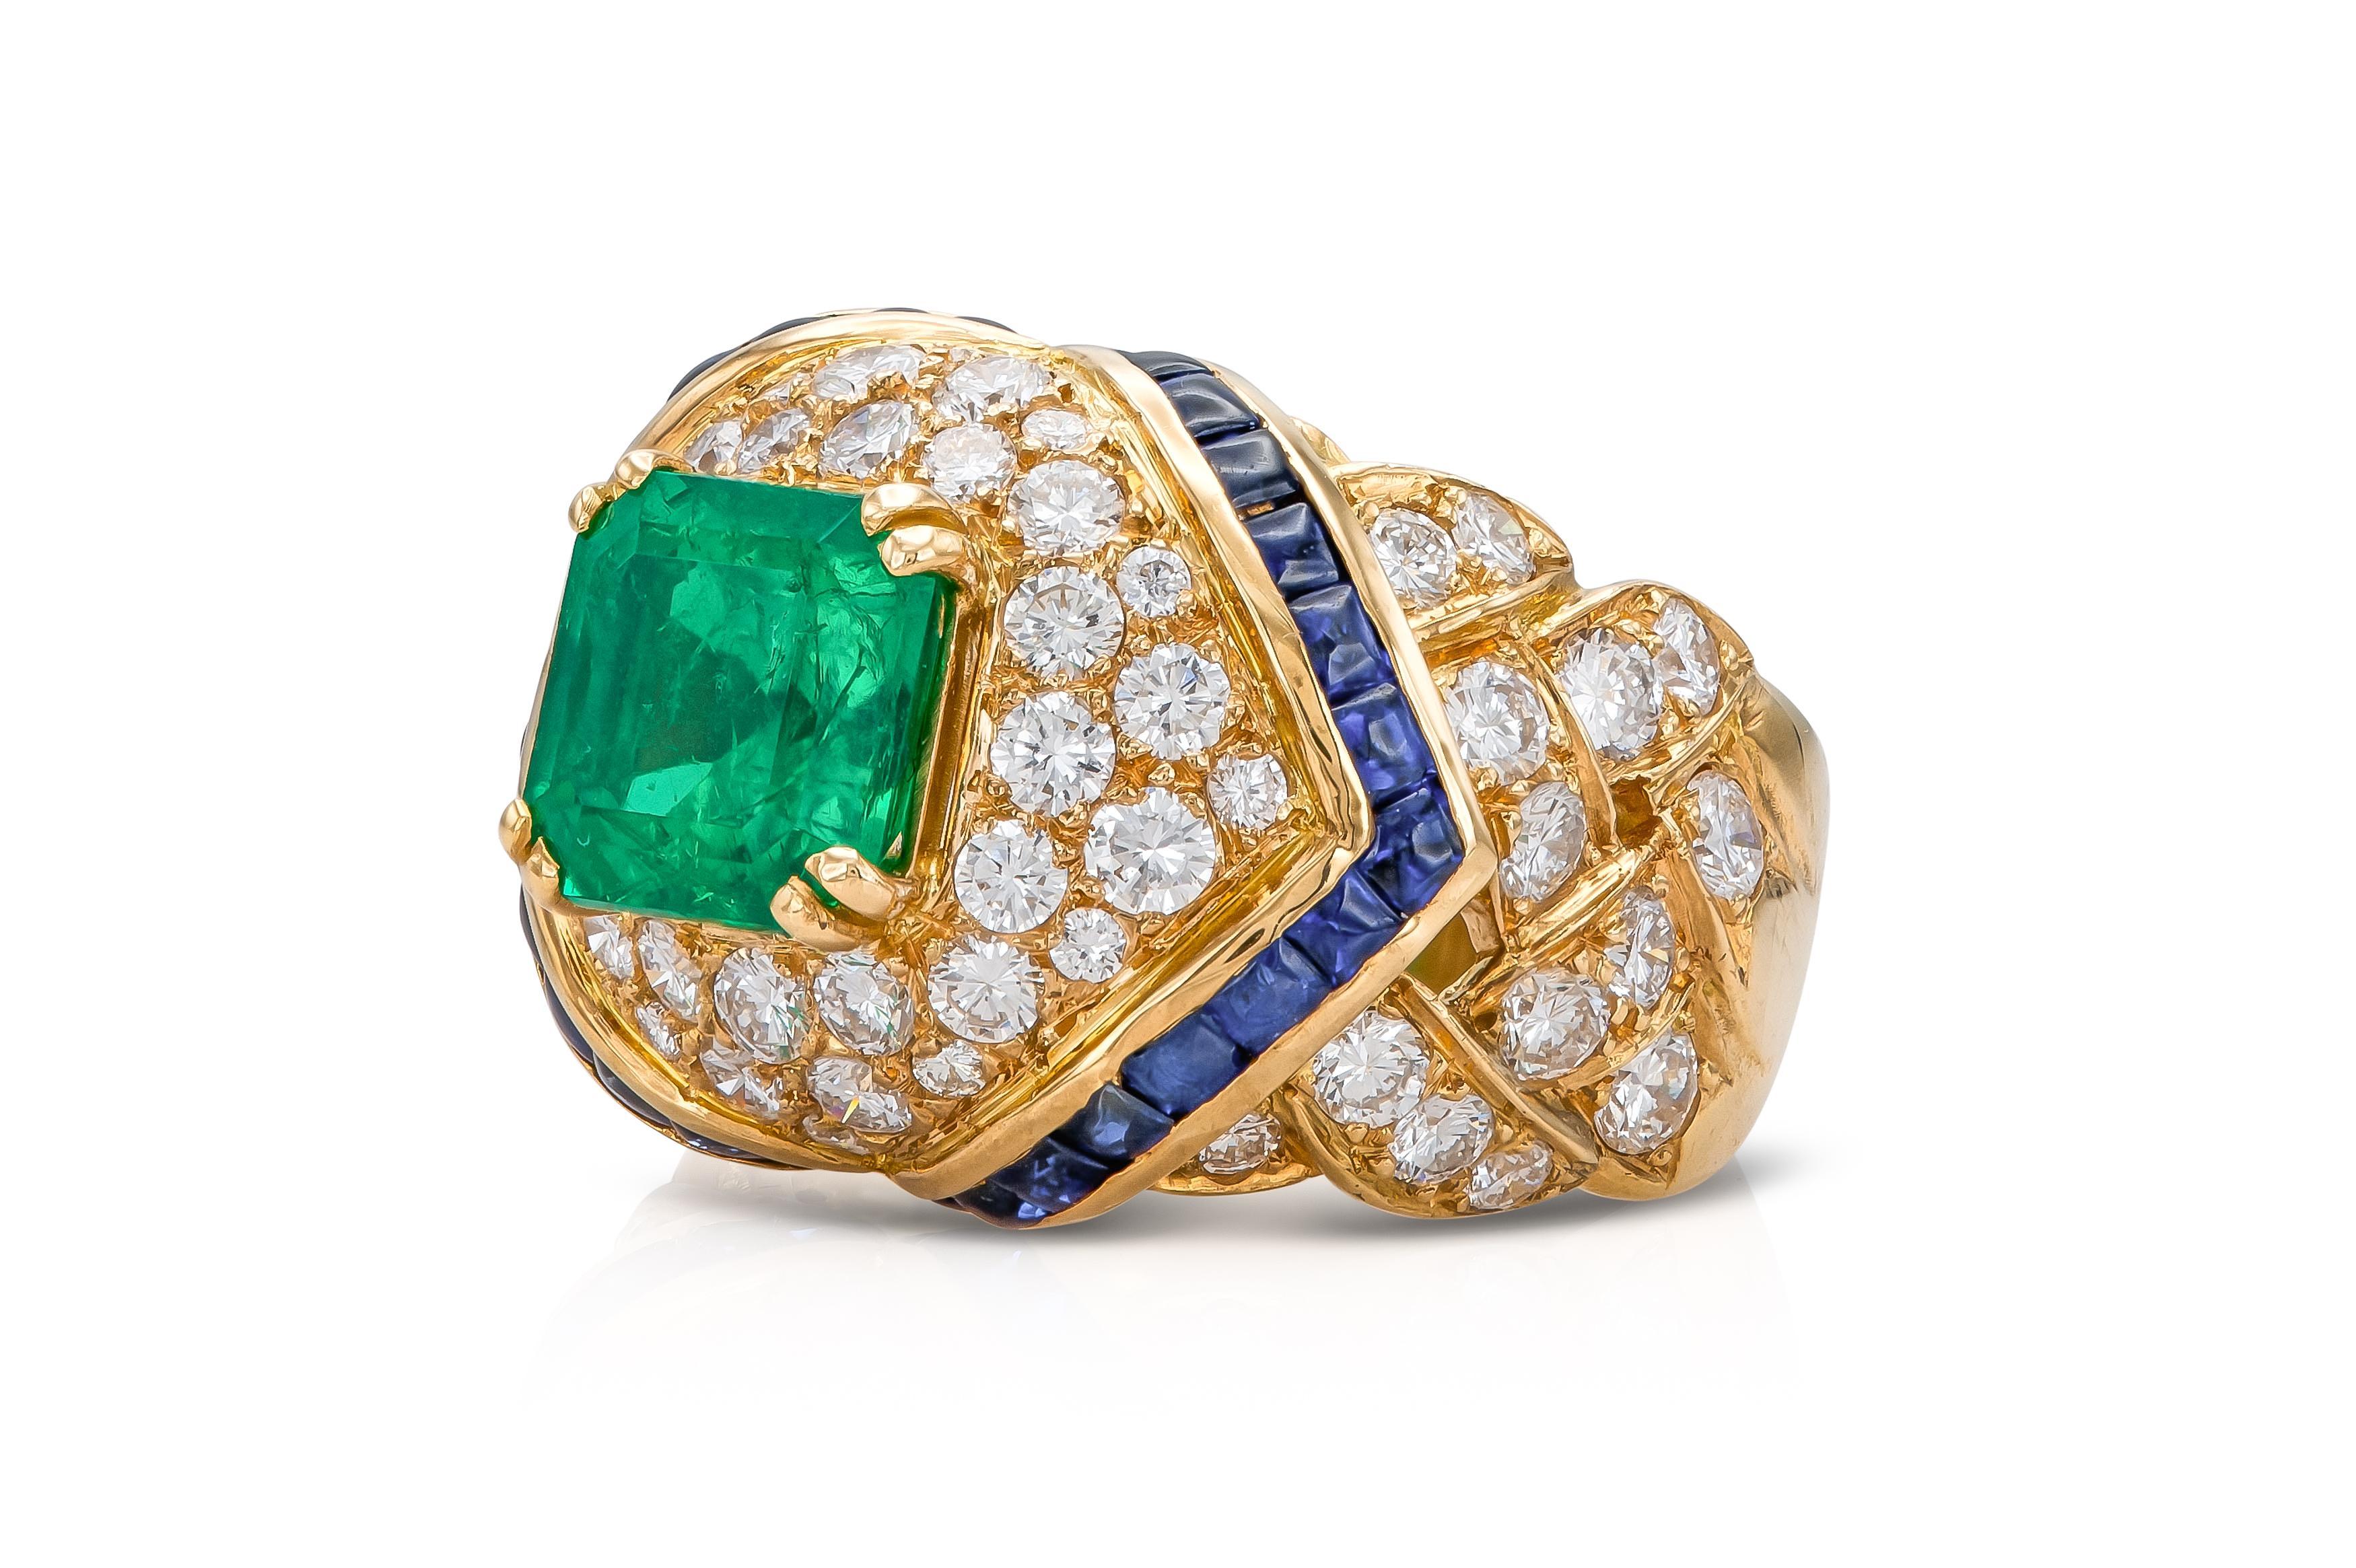 Finely crafted in 18k yellow gold with a Square Emerald cut Emerald weighing approximately 2.00 carats, 73 Round Brilliant cut Diamonds weighing approximately a total of 4.00. carats, and 30 Cabochon Sapphires weighing approximately a total of 1.50